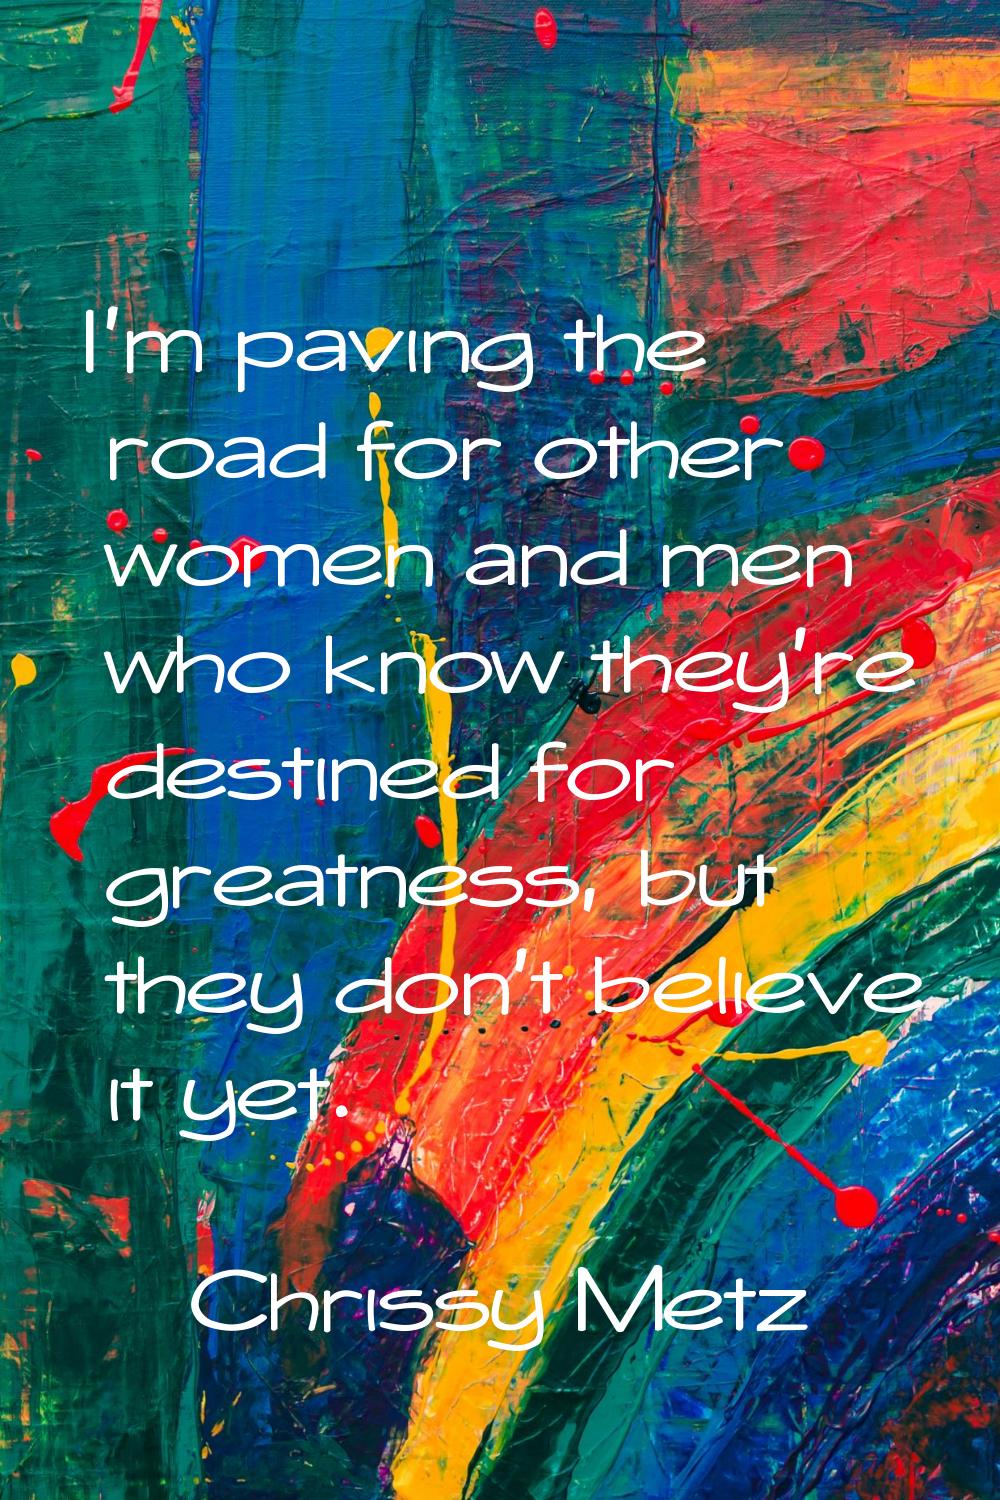 I'm paving the road for other women and men who know they're destined for greatness, but they don't